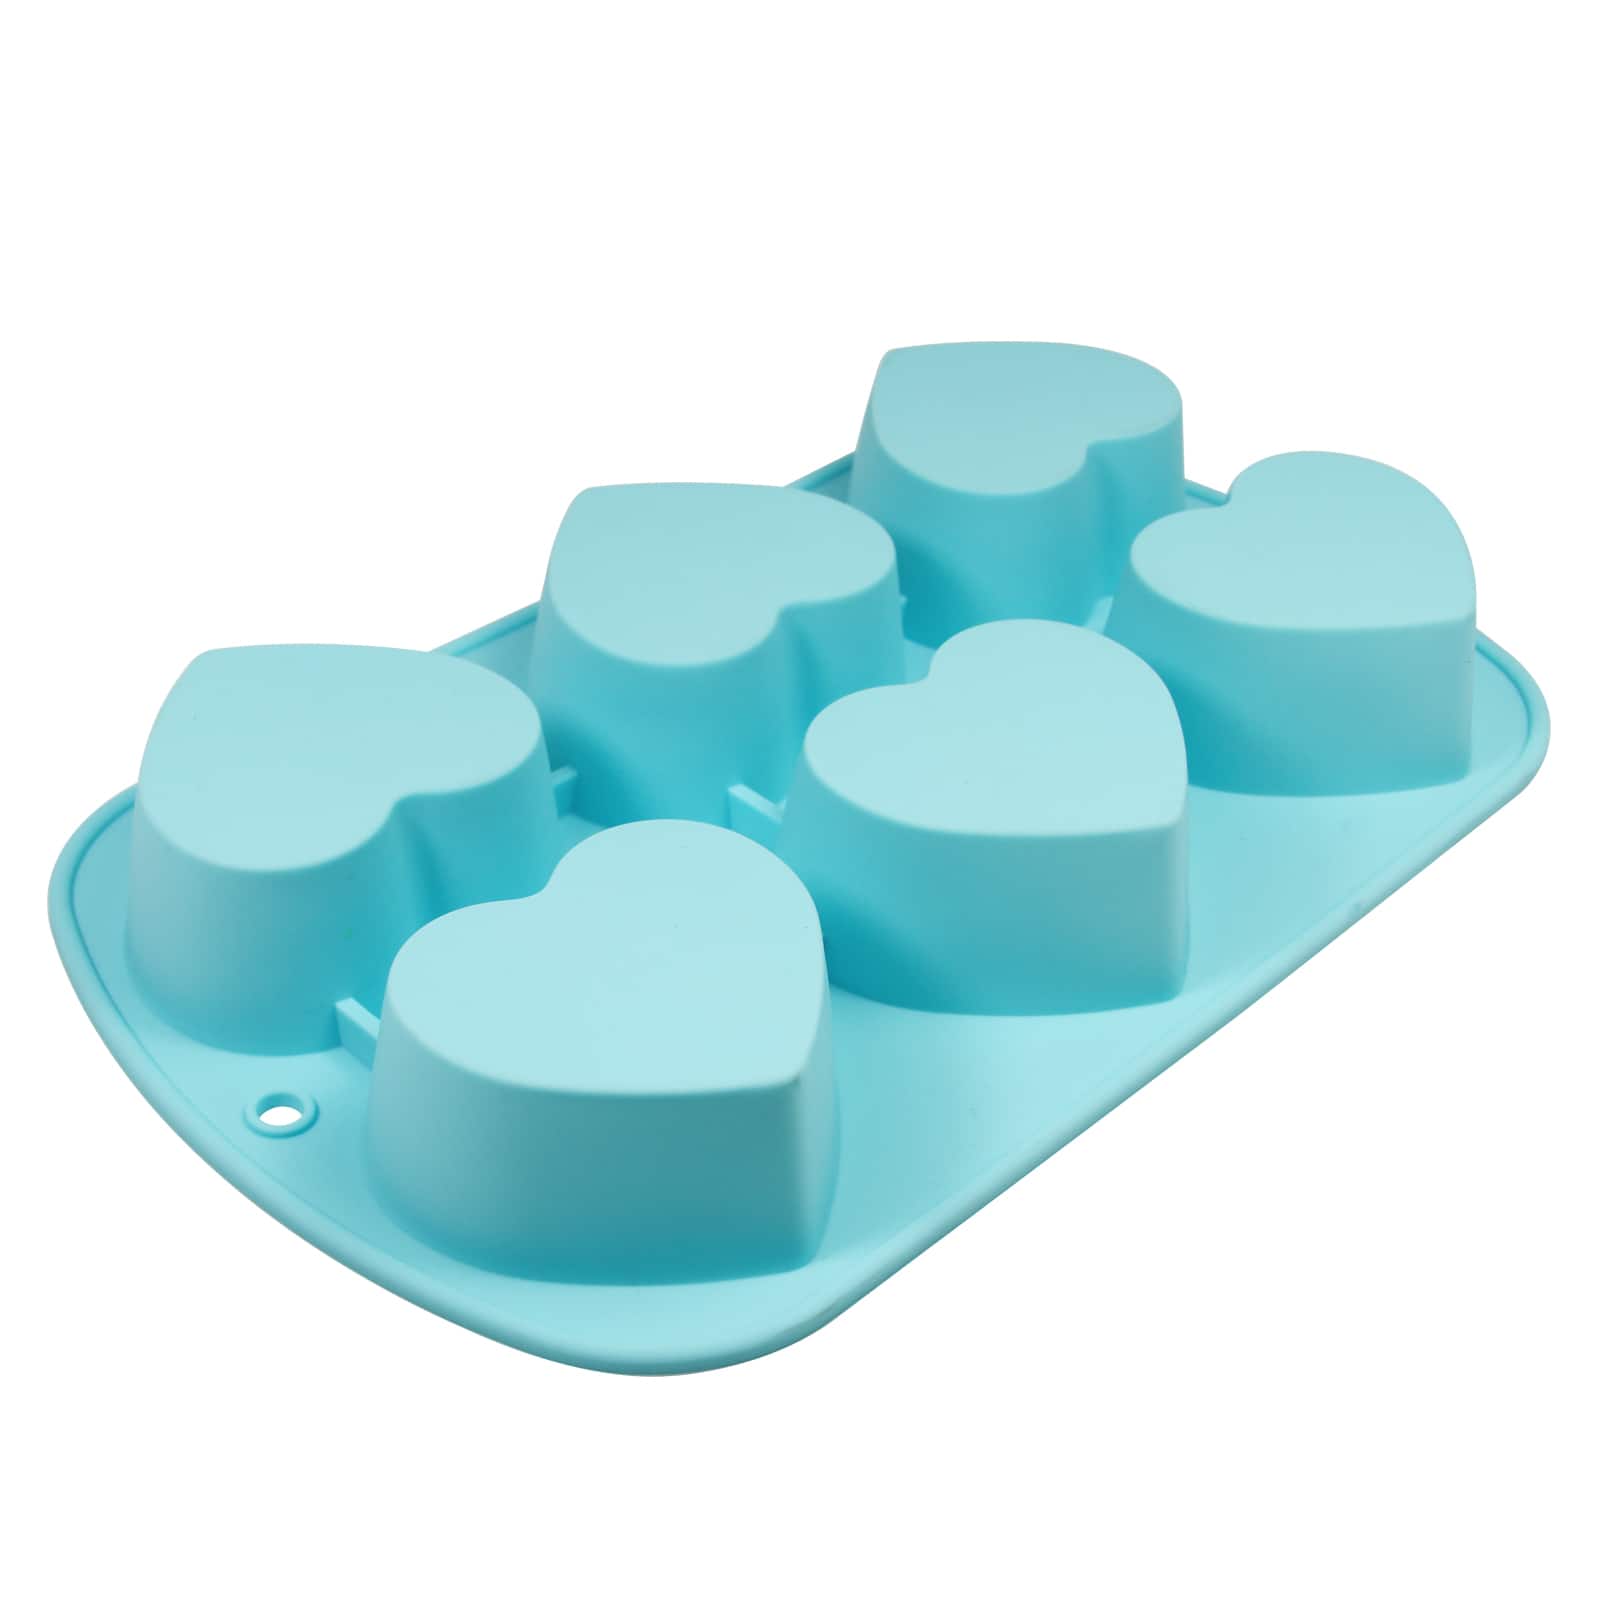 Flat 6-Cavity Silicone Treat Mold by Celebrate It